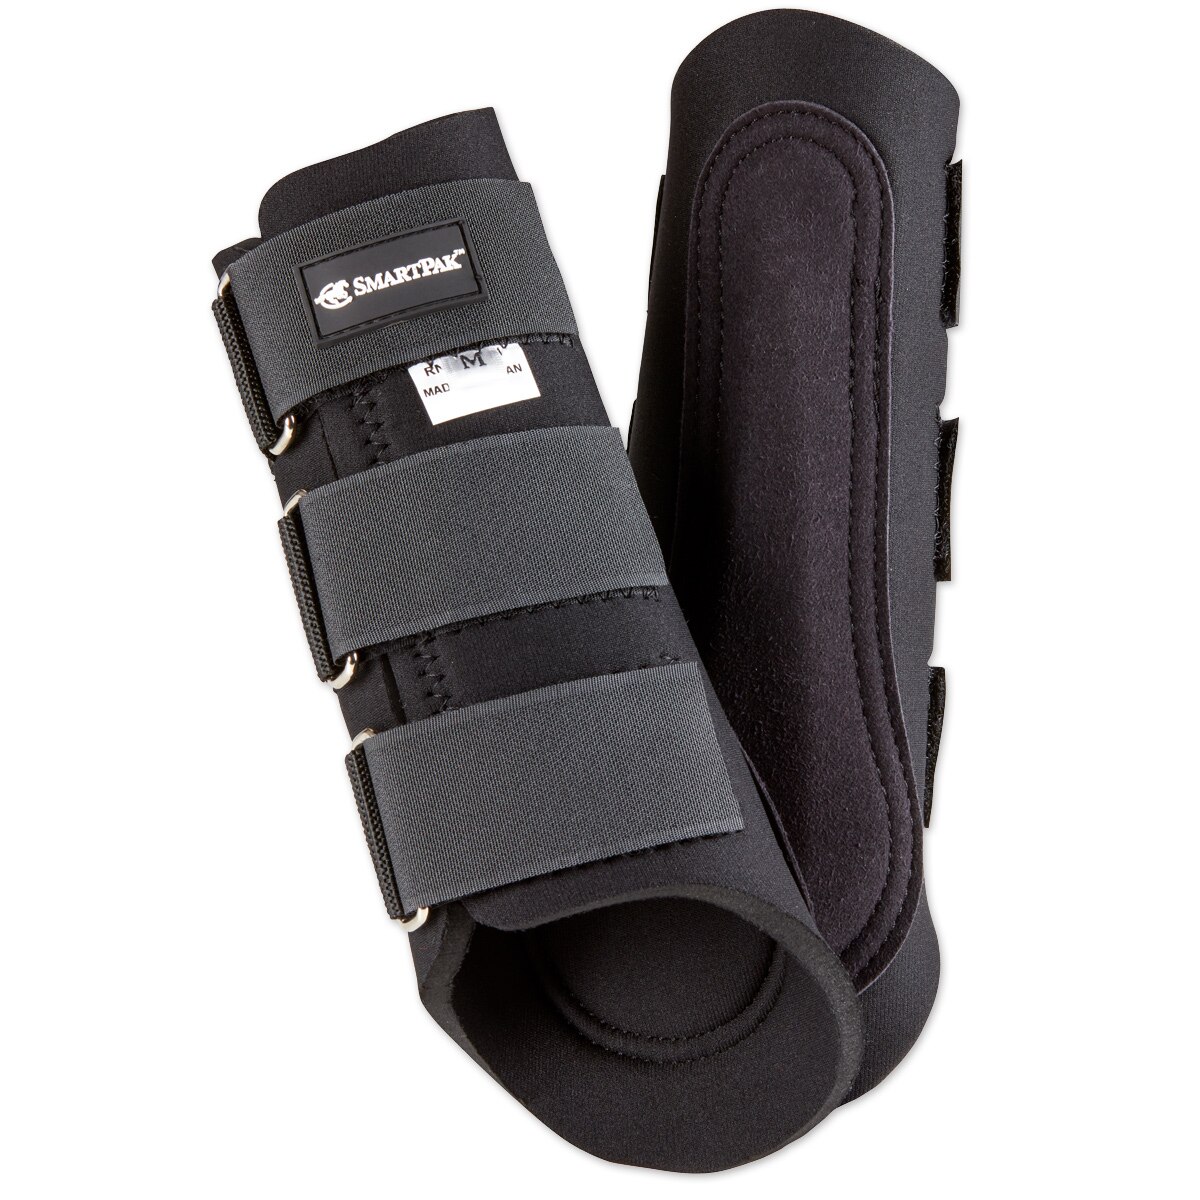 Tough-1 Neoprene Splint Boots Black NEW Horse Equine Jumping Protective 66-3318 